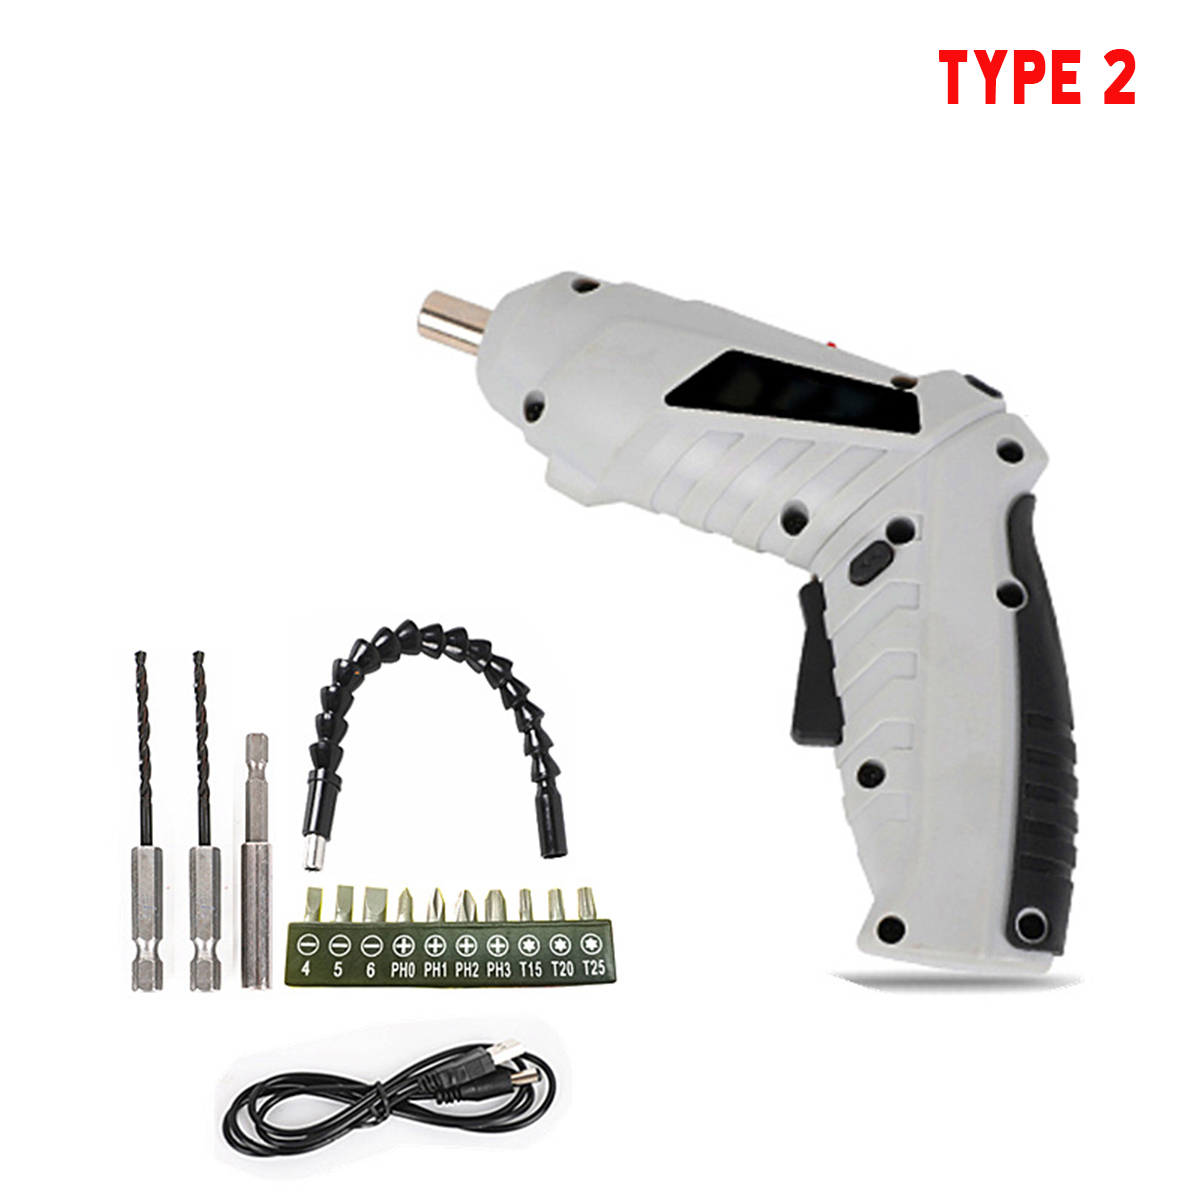 Mini Cordless Electric Screwdriver Set USB Rechargeable Drill Driver With Work Light 73